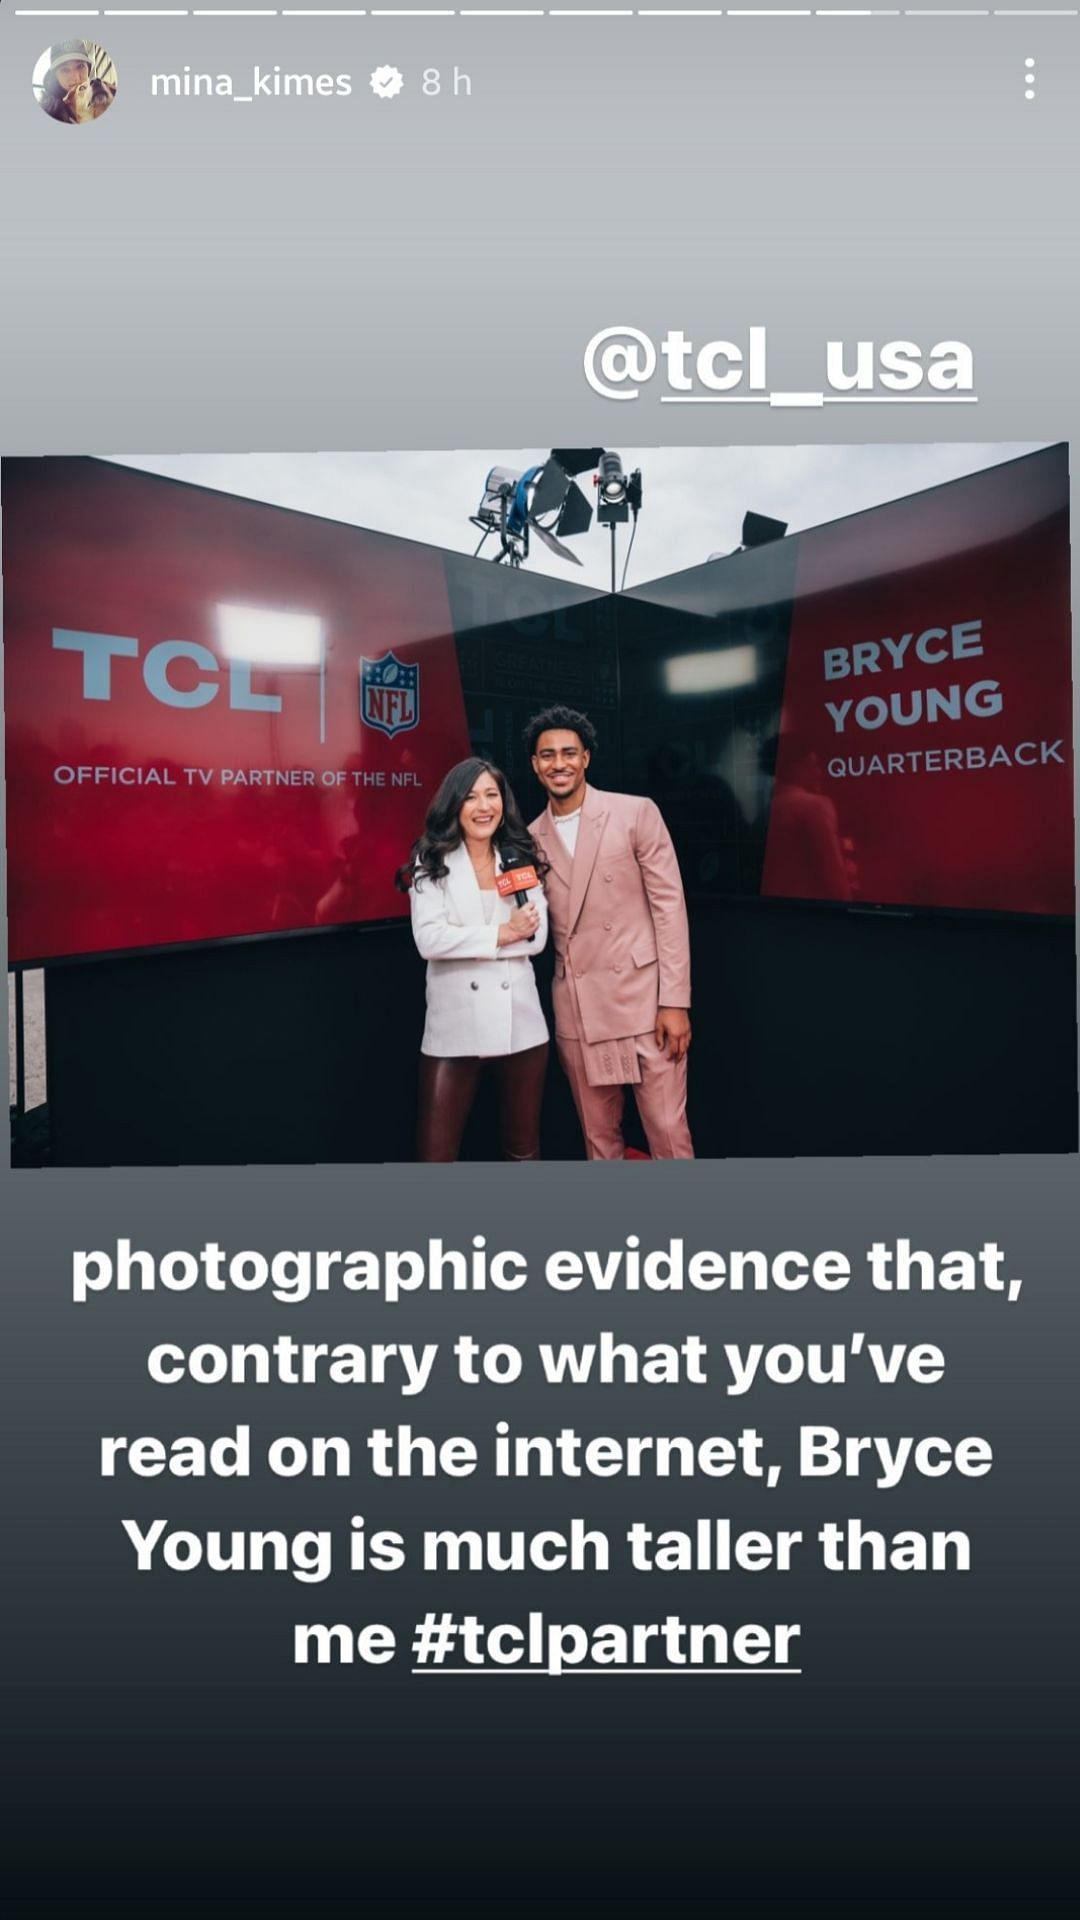 Bryce Young and Mina Kimes standing together on Draft Day (from IG/@mina_kimes)